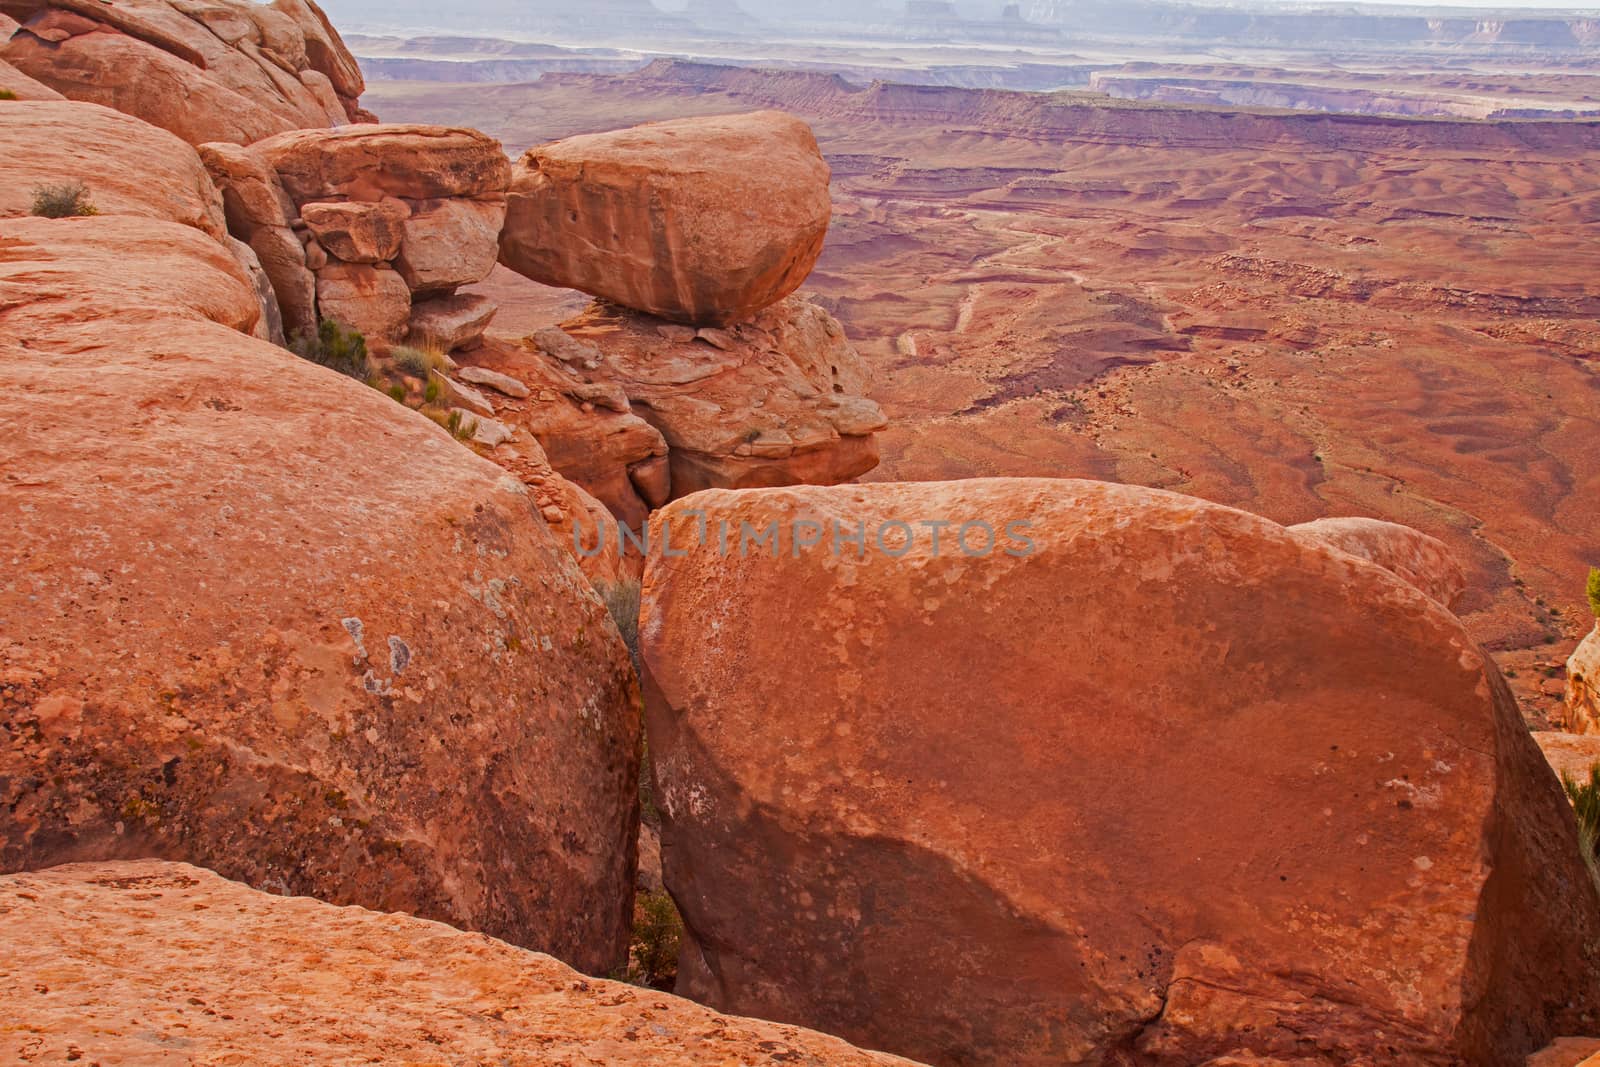 View from Grand View, Canyonlands National Park, Utah